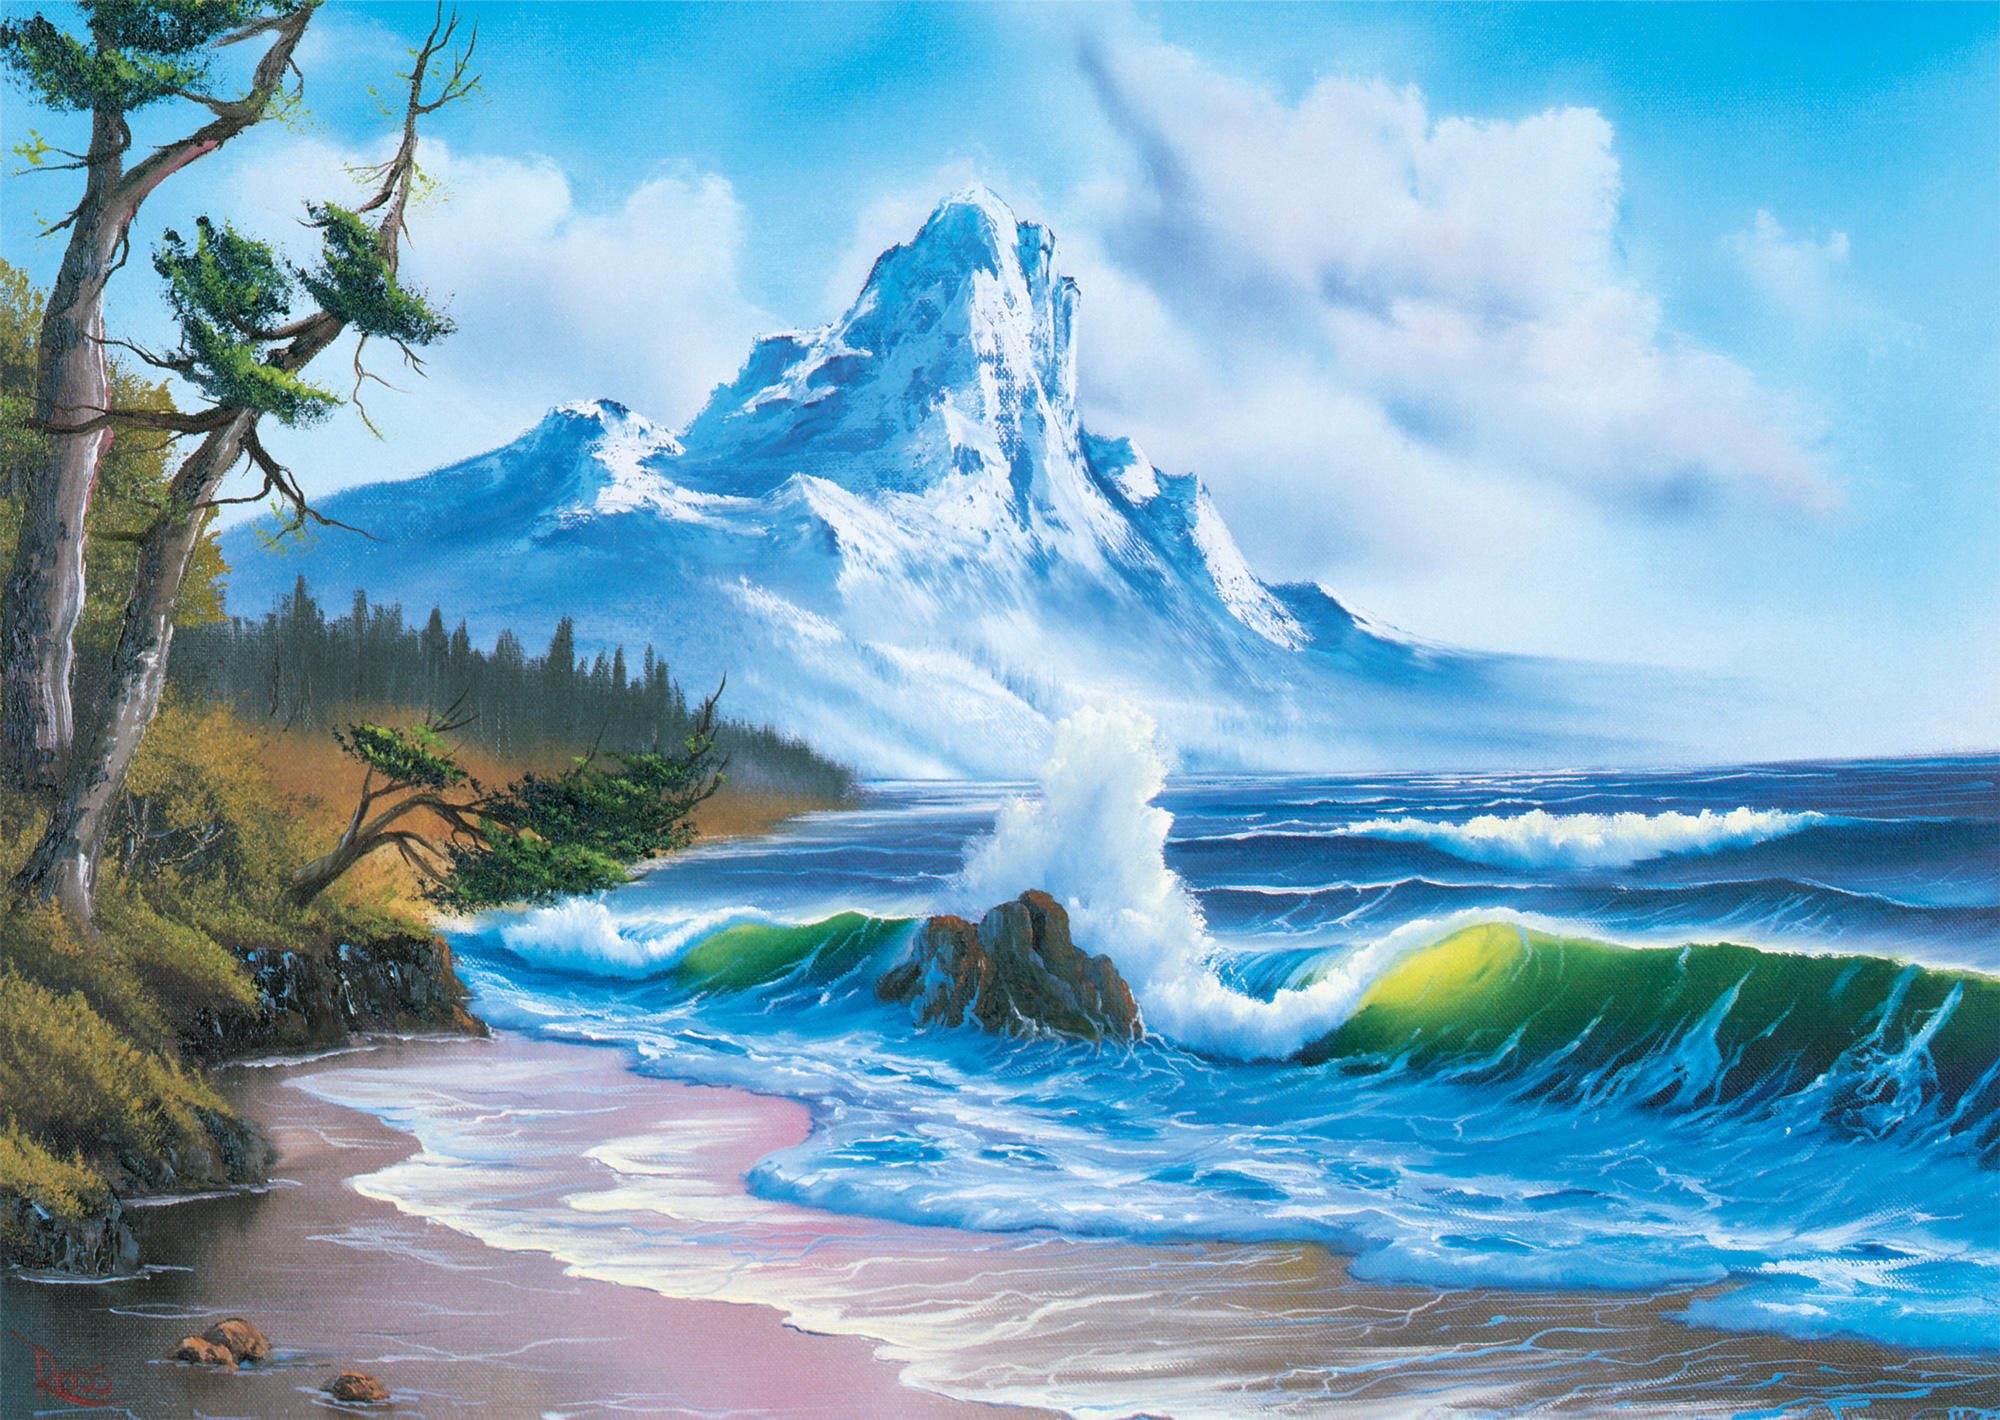 Bob Ross: Mountain by the Sea